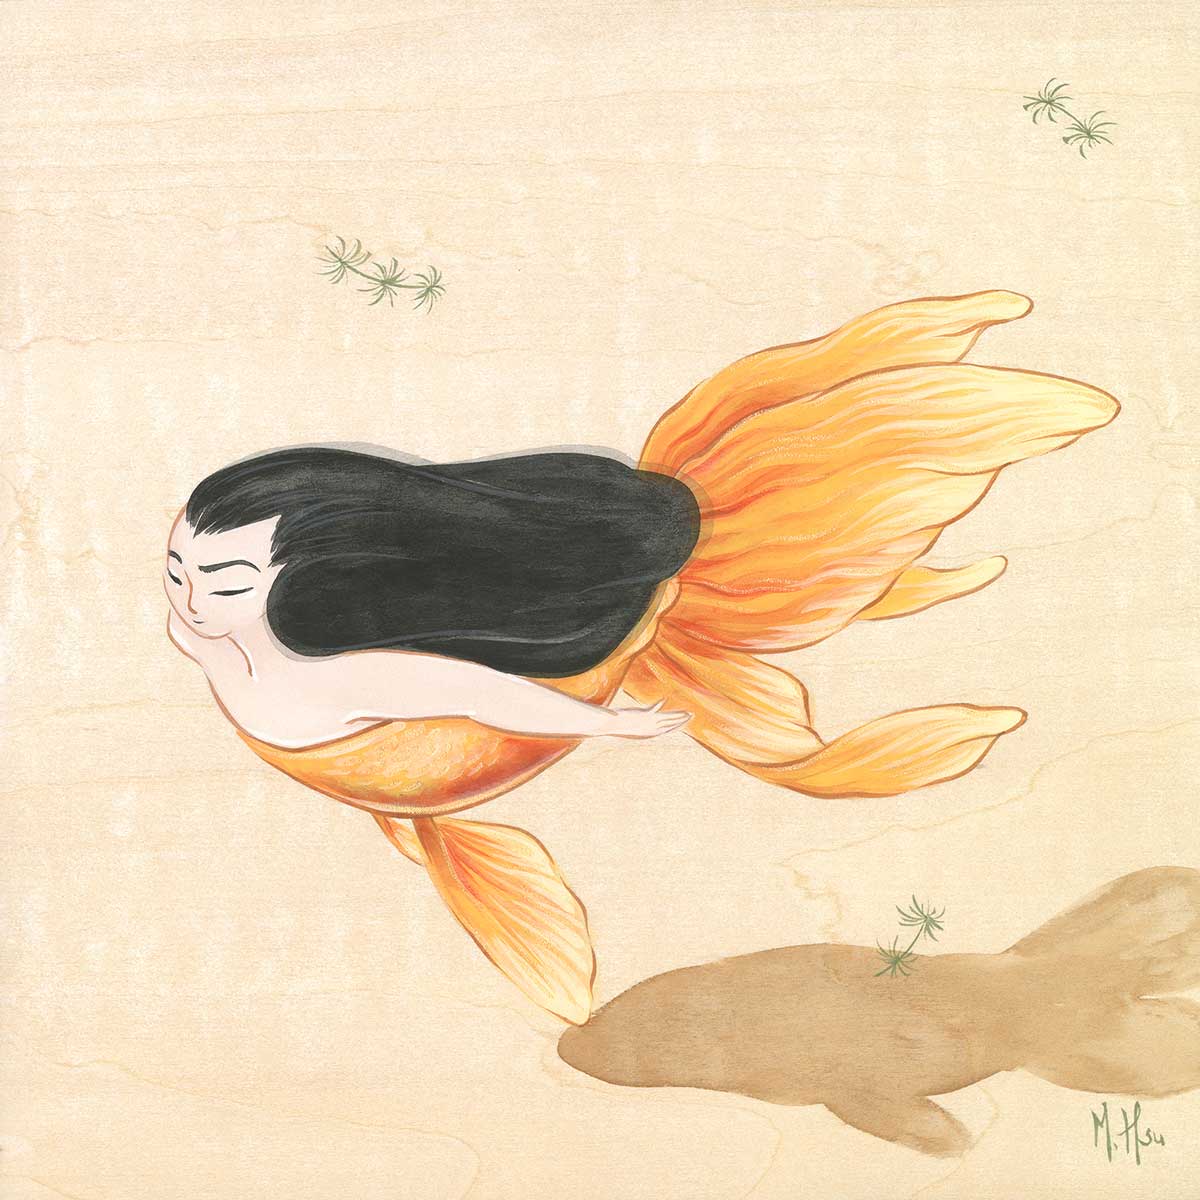 Ningyo 人魚: Exquisite Tales of the Human Fish